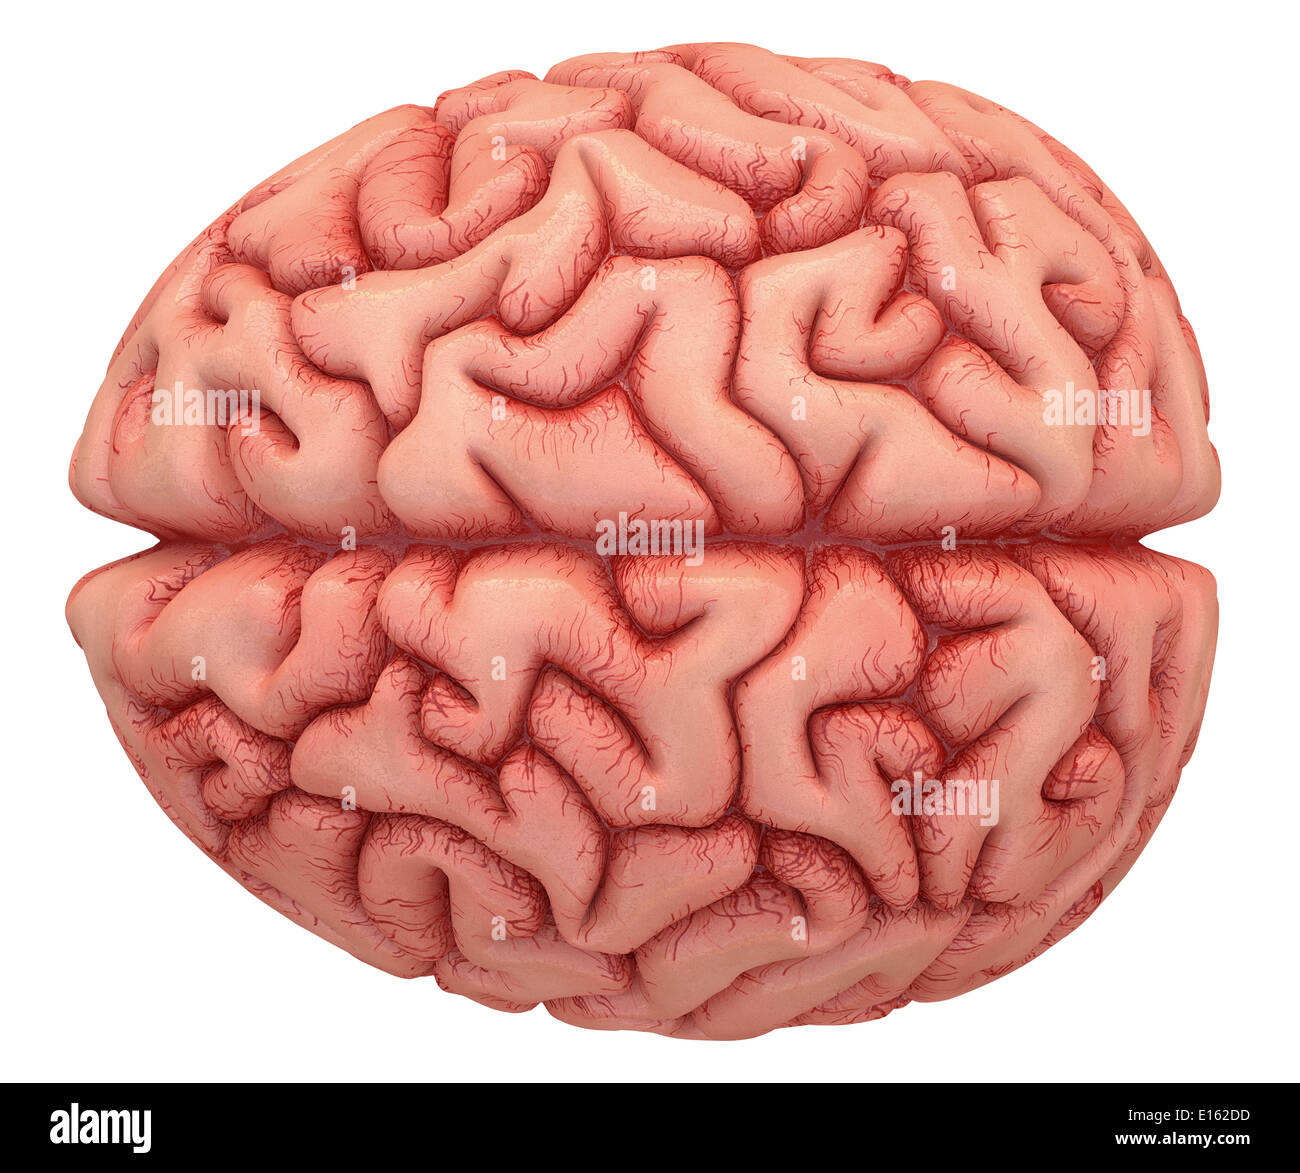 Human brain on white background with clipping path included. Stock Photo